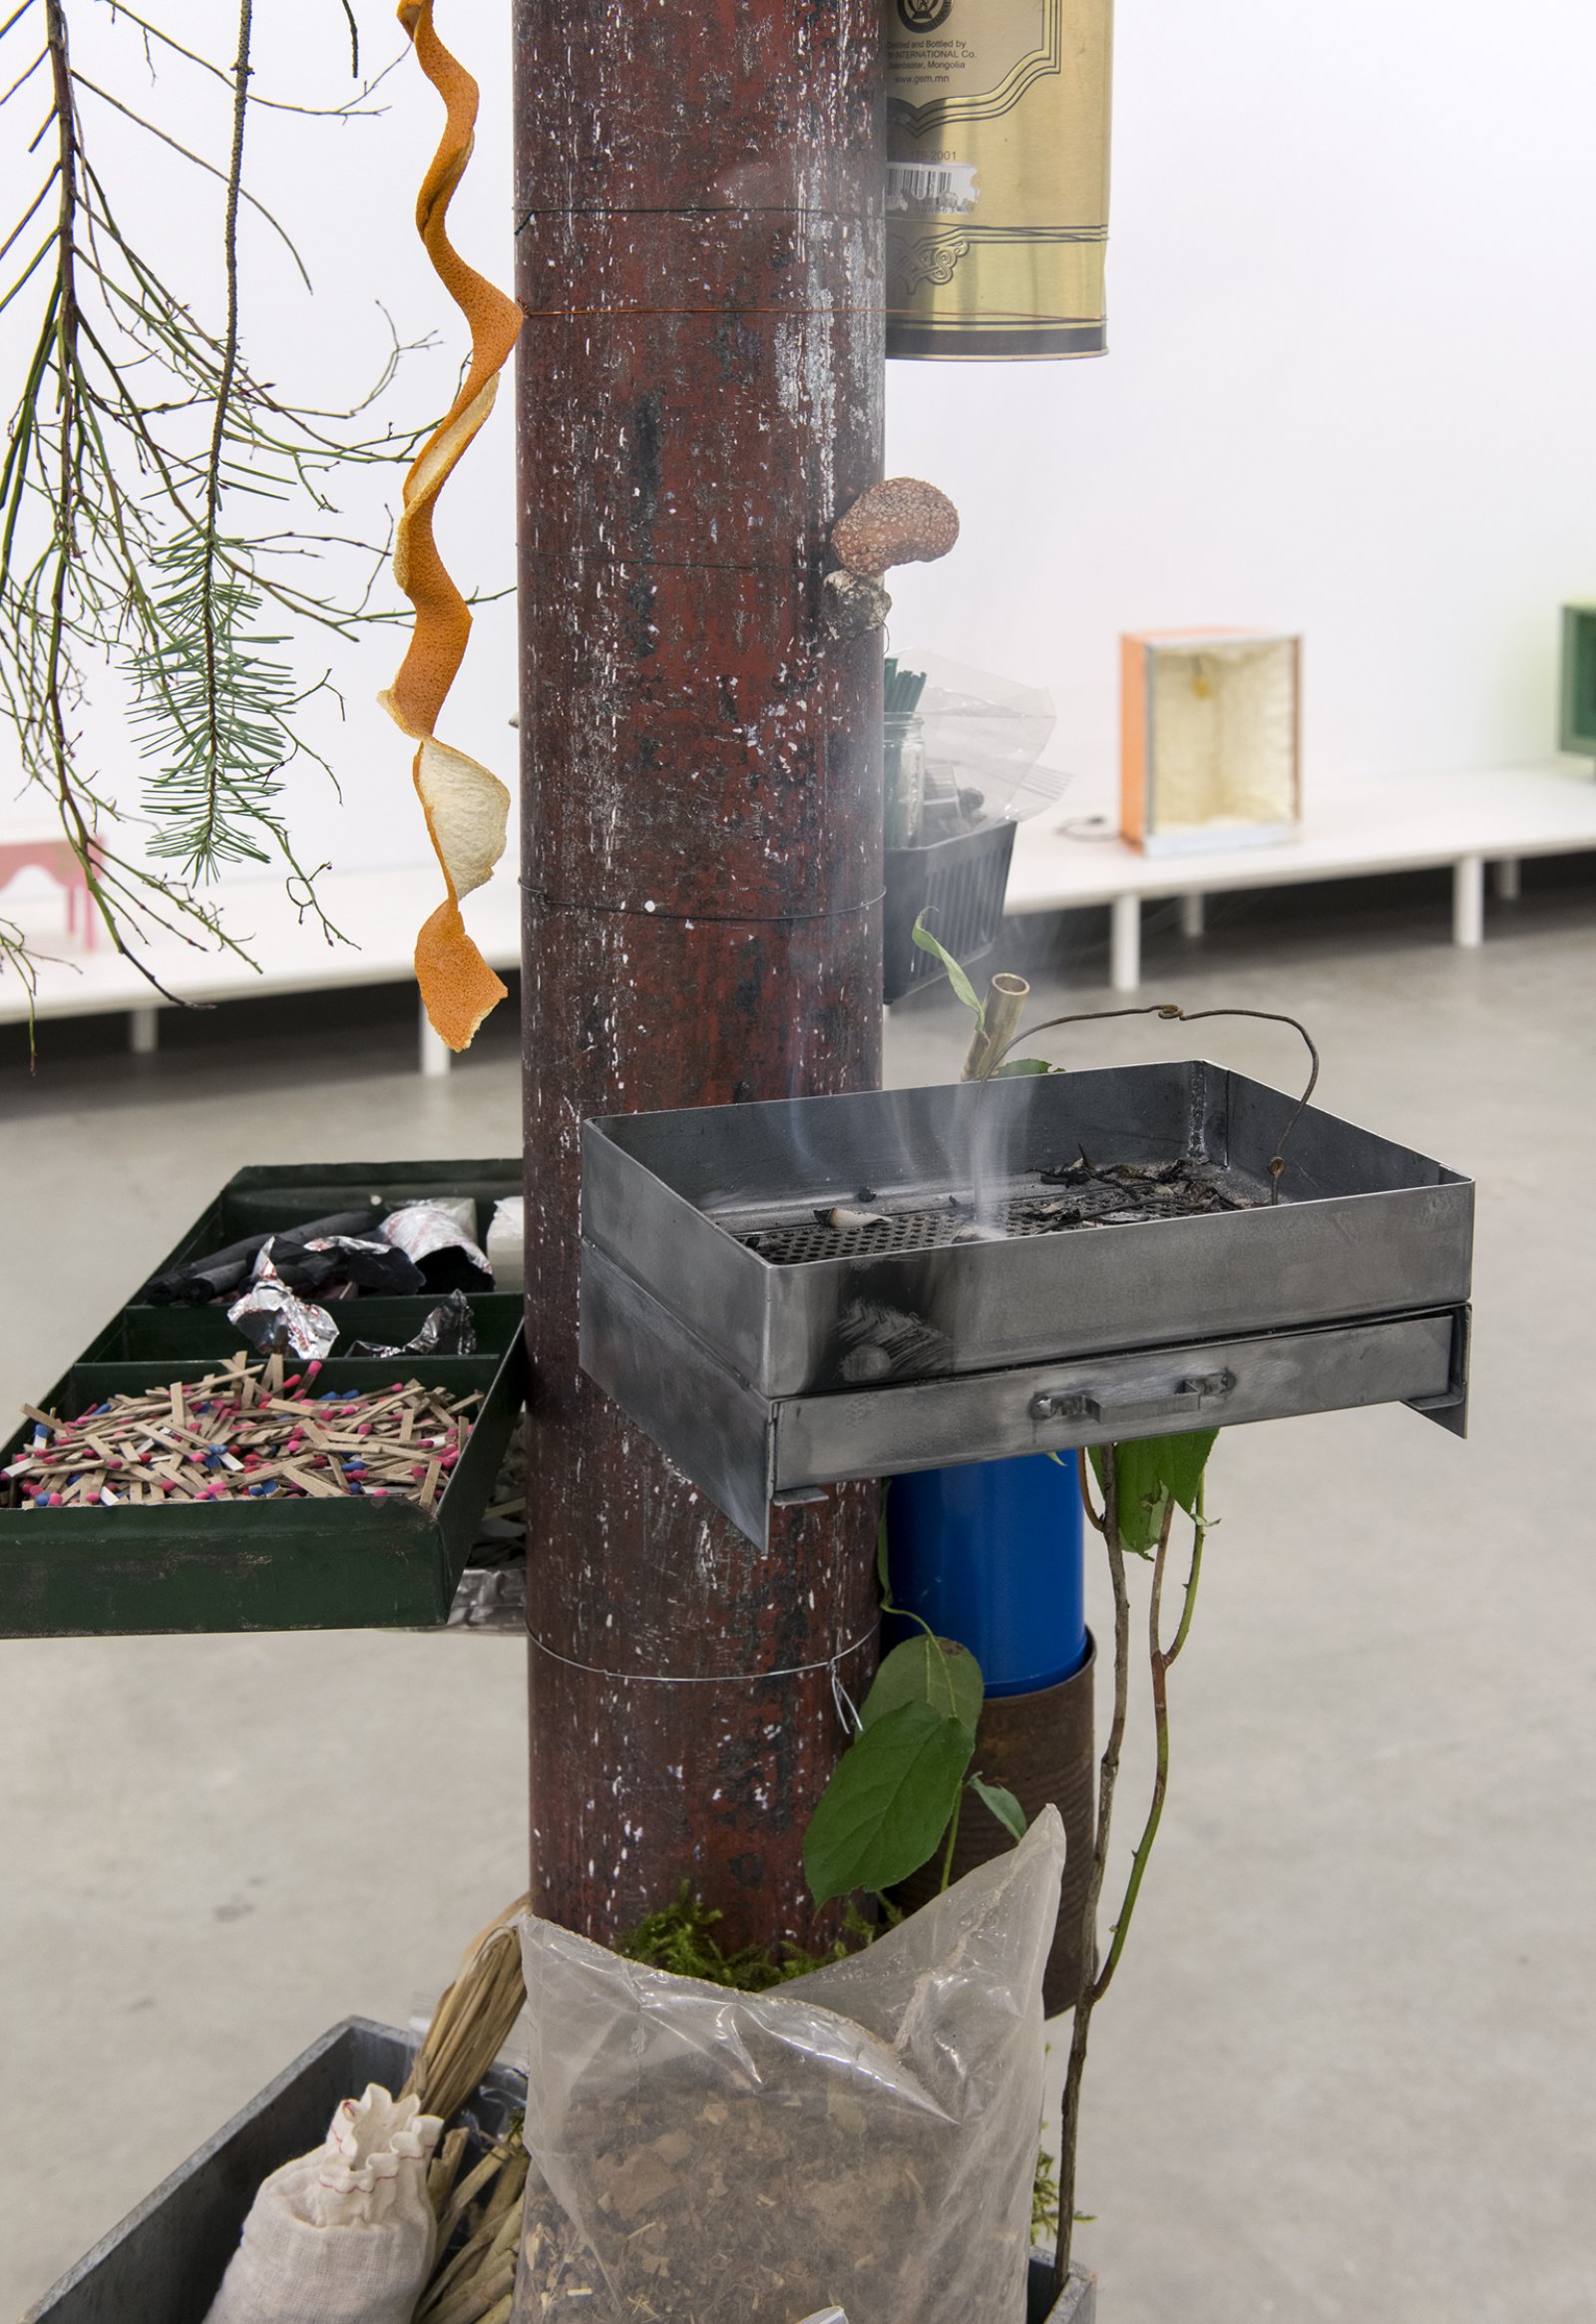 Gareth Moore, installation view, Household Temple Yard, Catriona Jeffries, 2013 ​​ by Ashes Withyman